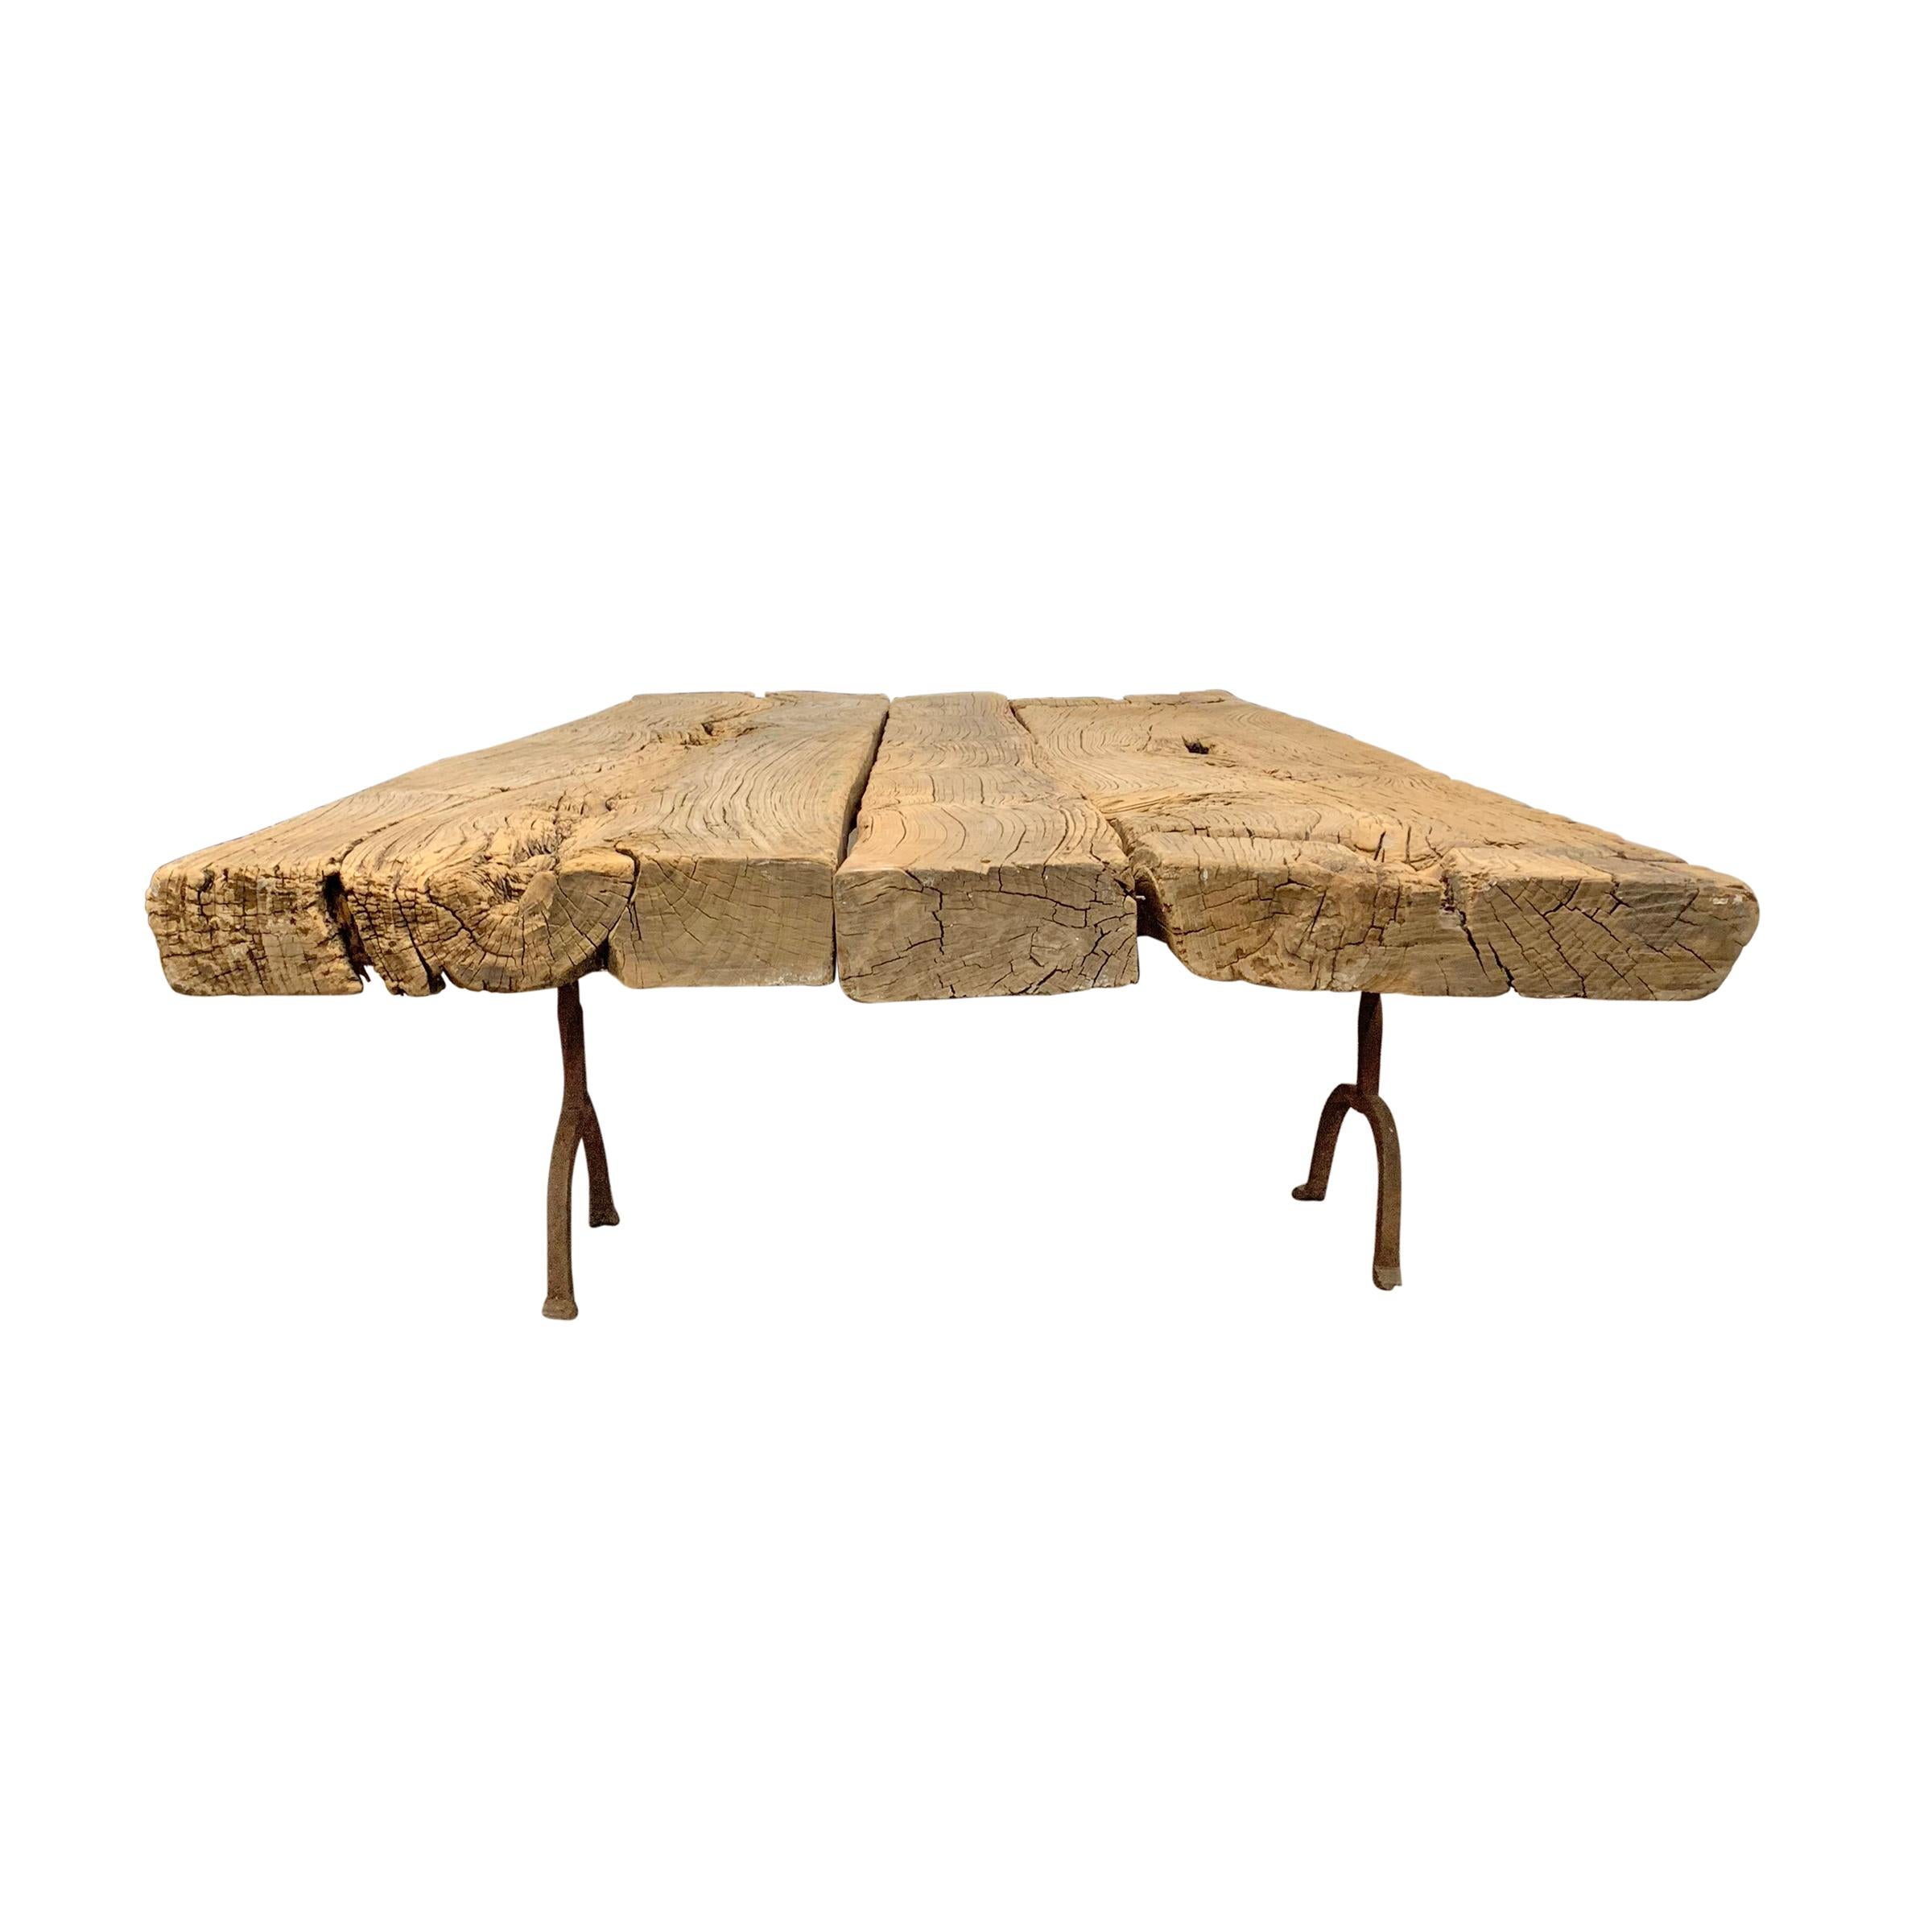 Unknown Monumental Low Table Made from Ancient Timbers